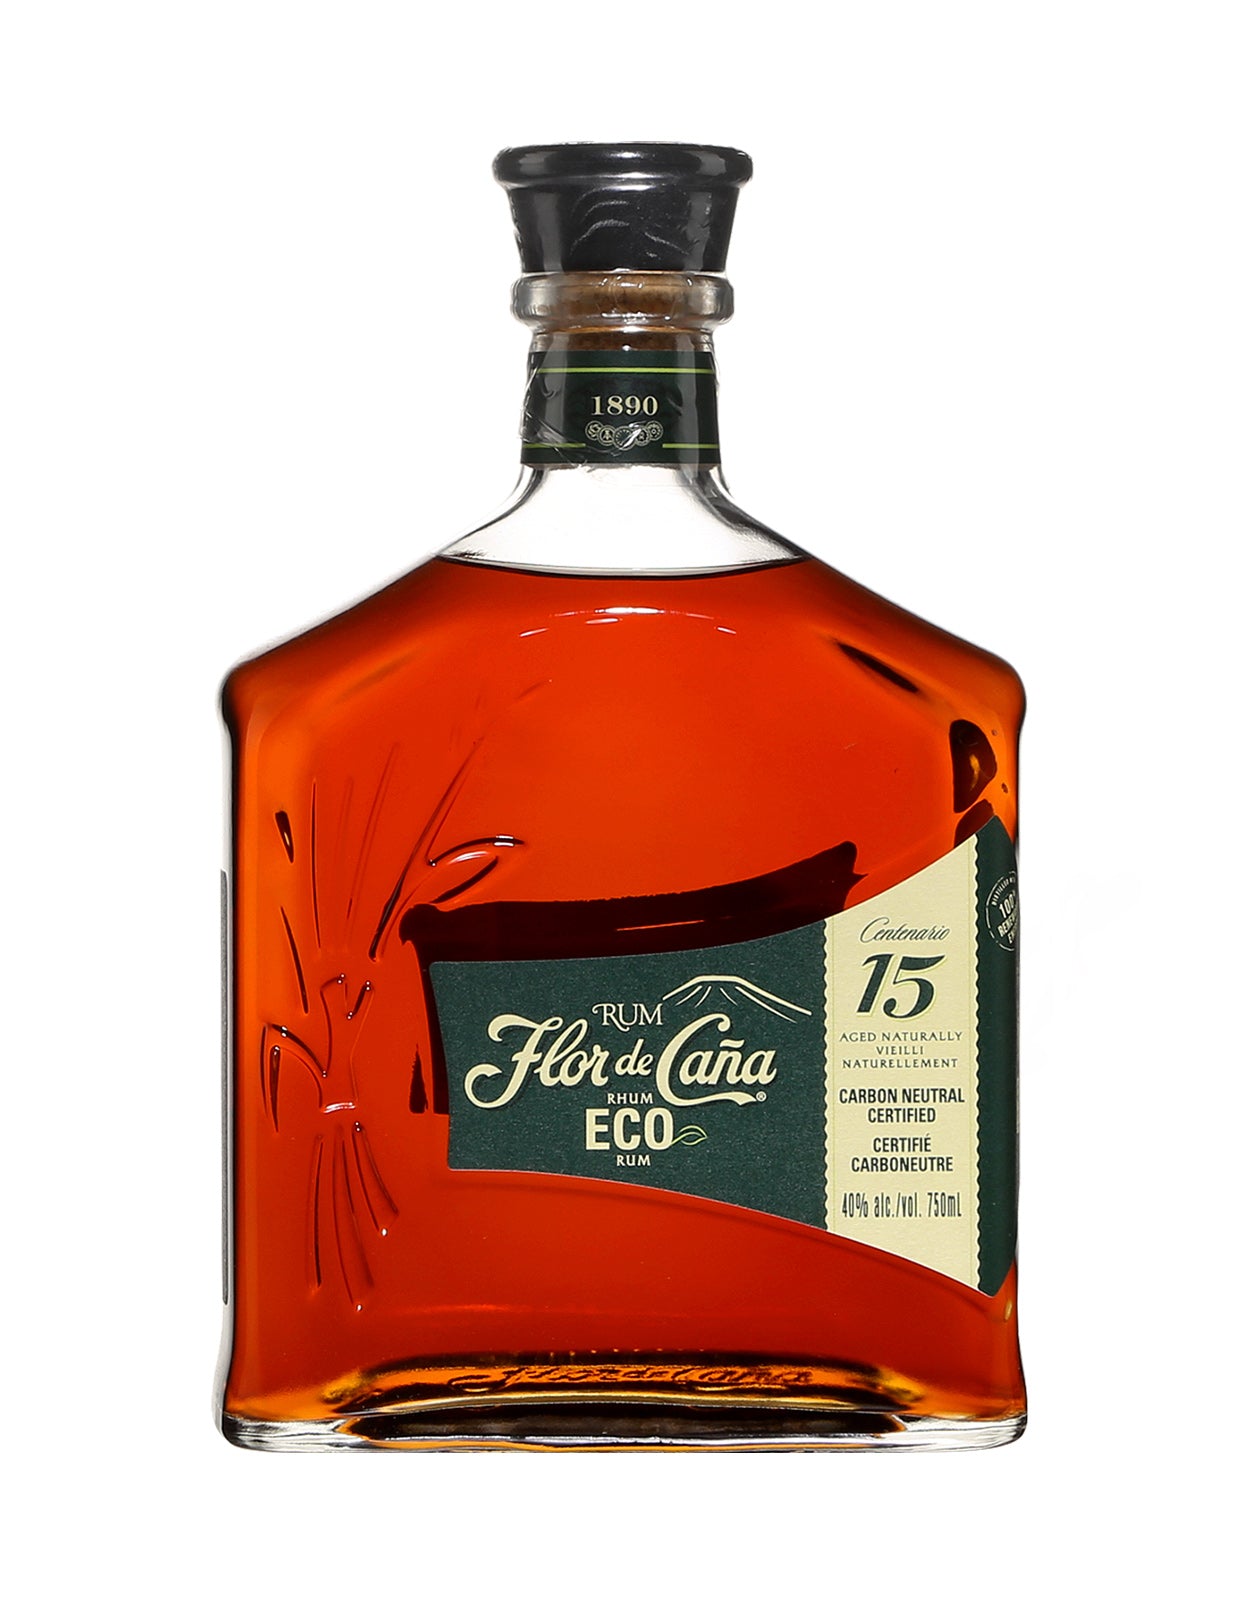 Flor de Cana ECO 15 Year Old Rum